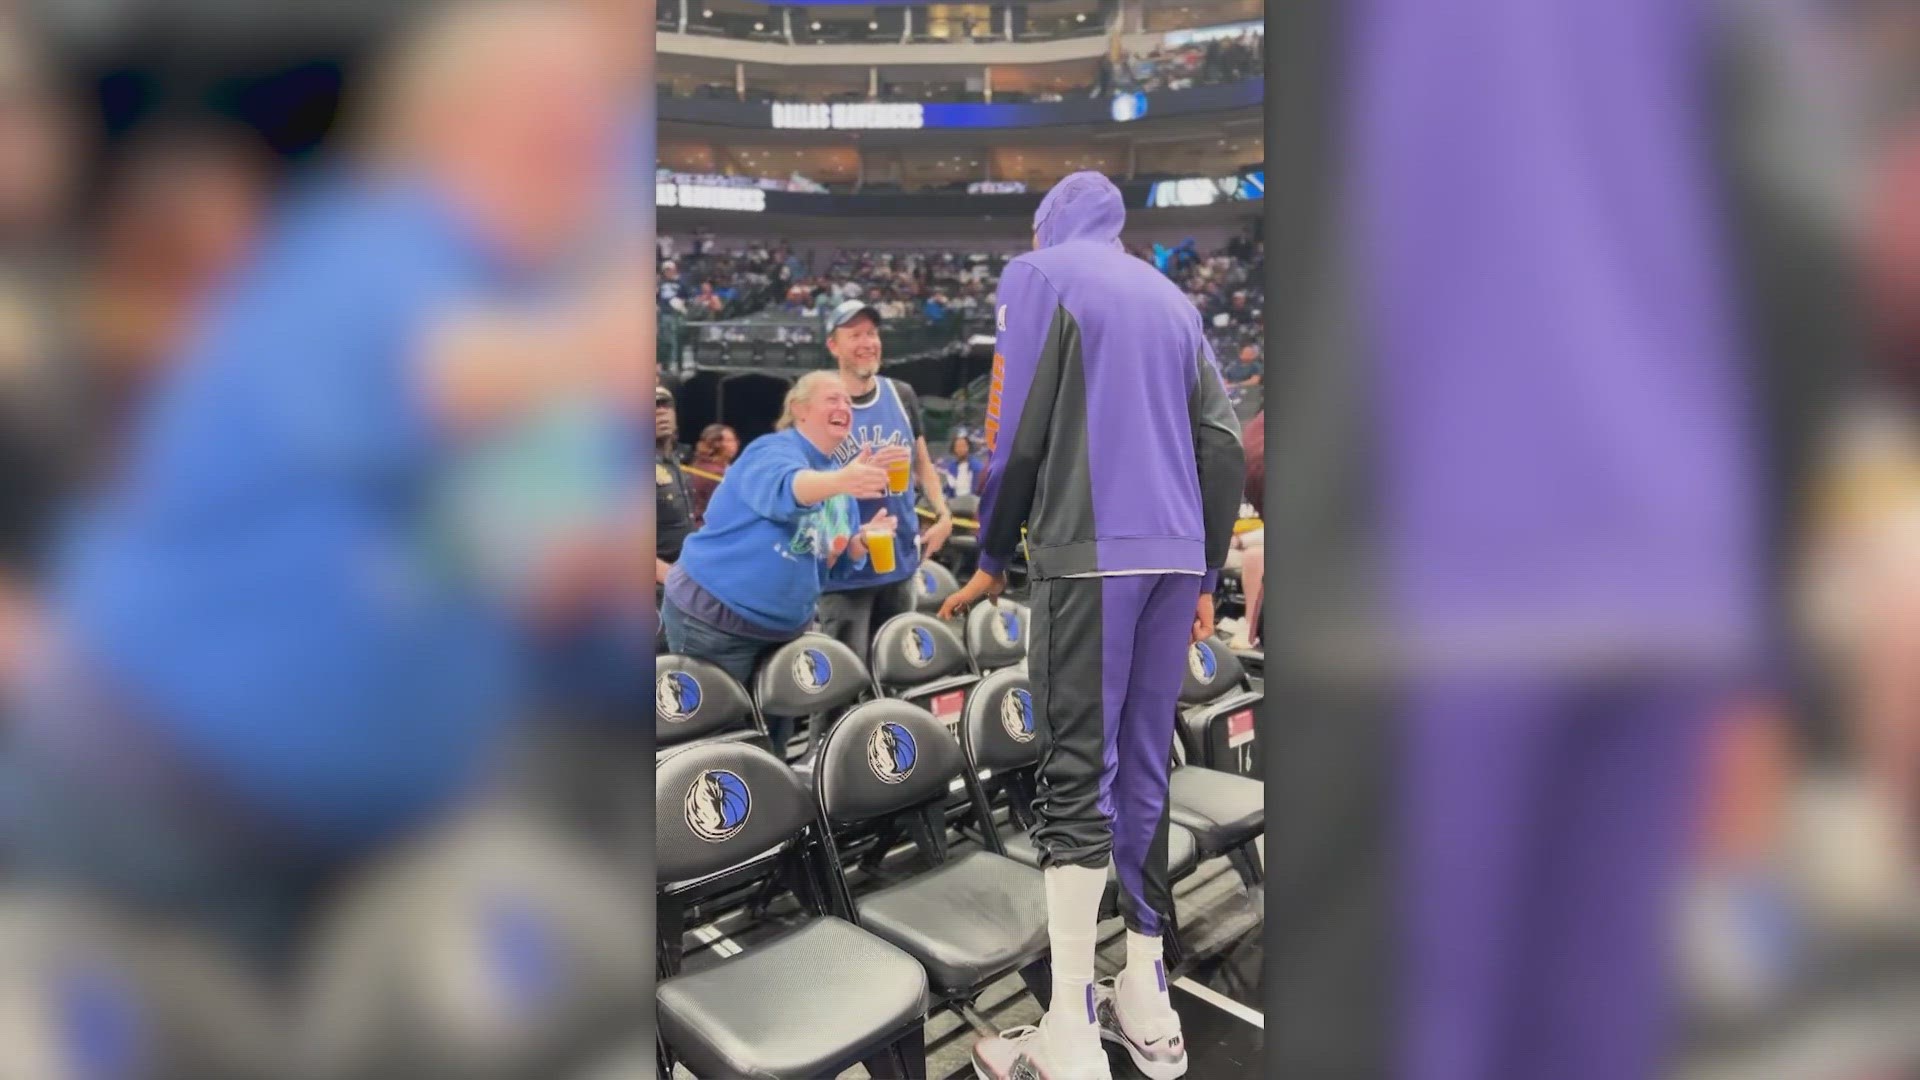 The incident occurred during warmups prior to tipoff between the Mavericks and Suns' Thursday, Feb. 22, game at Dallas' American Airlines Center.